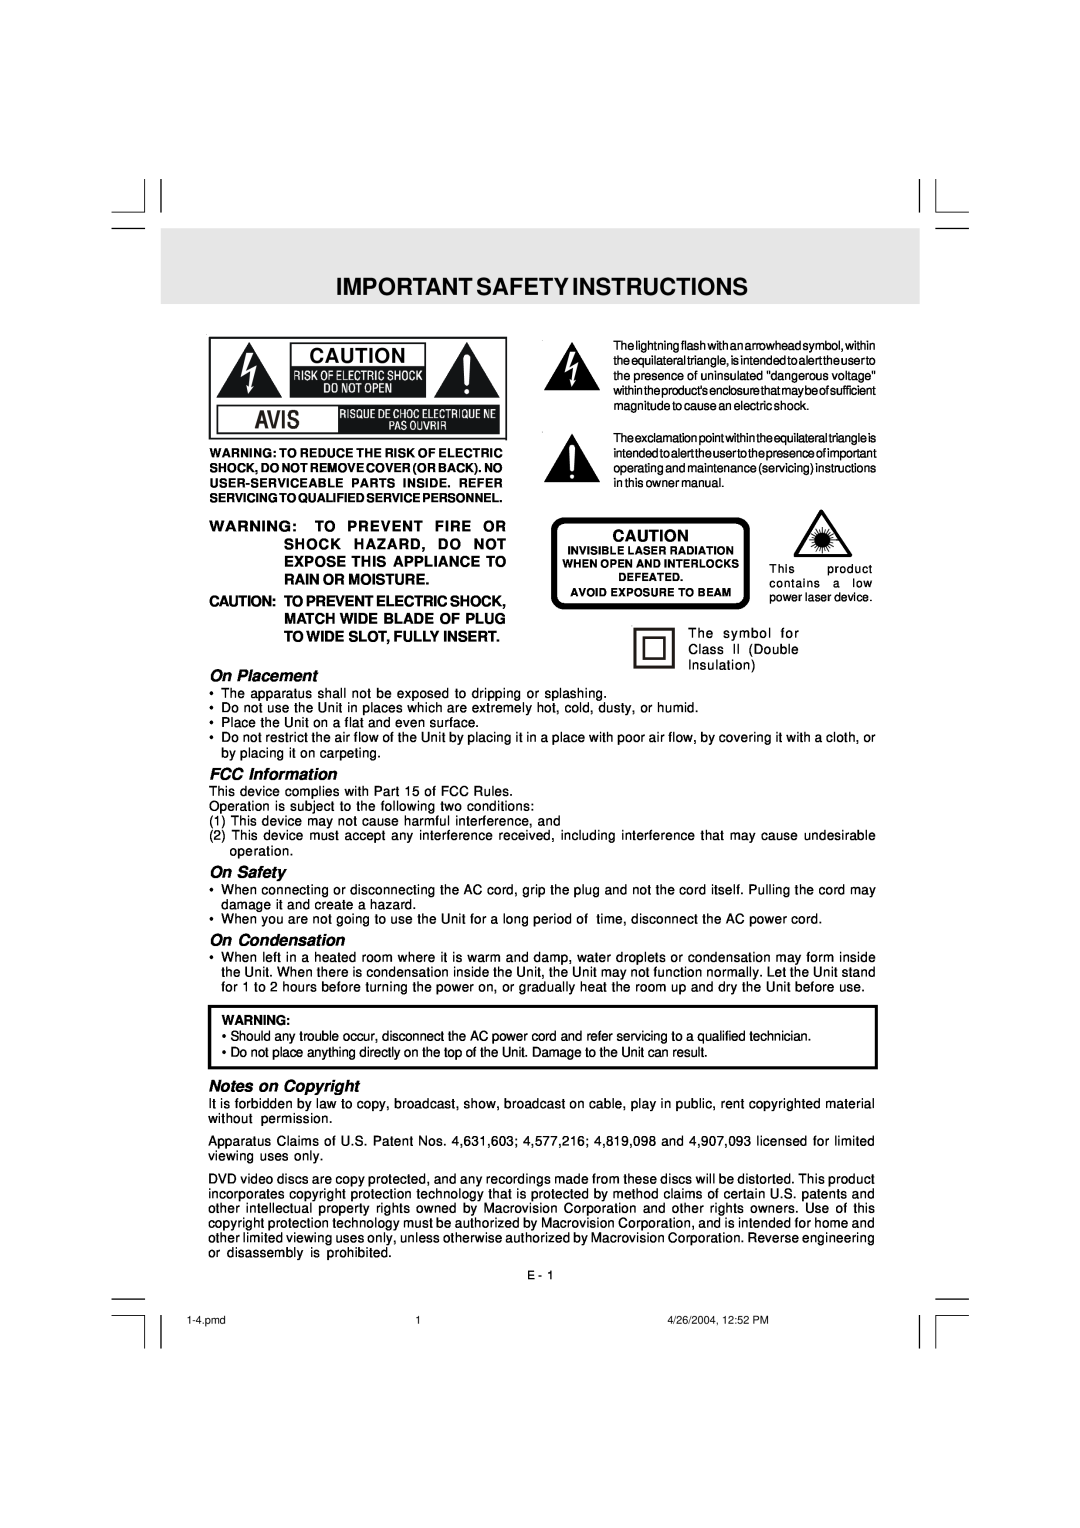 Audiovox DVD Home Theatre System CD-R/RW CD Playback Important Safety Instructions, On Placement, FCC Information 